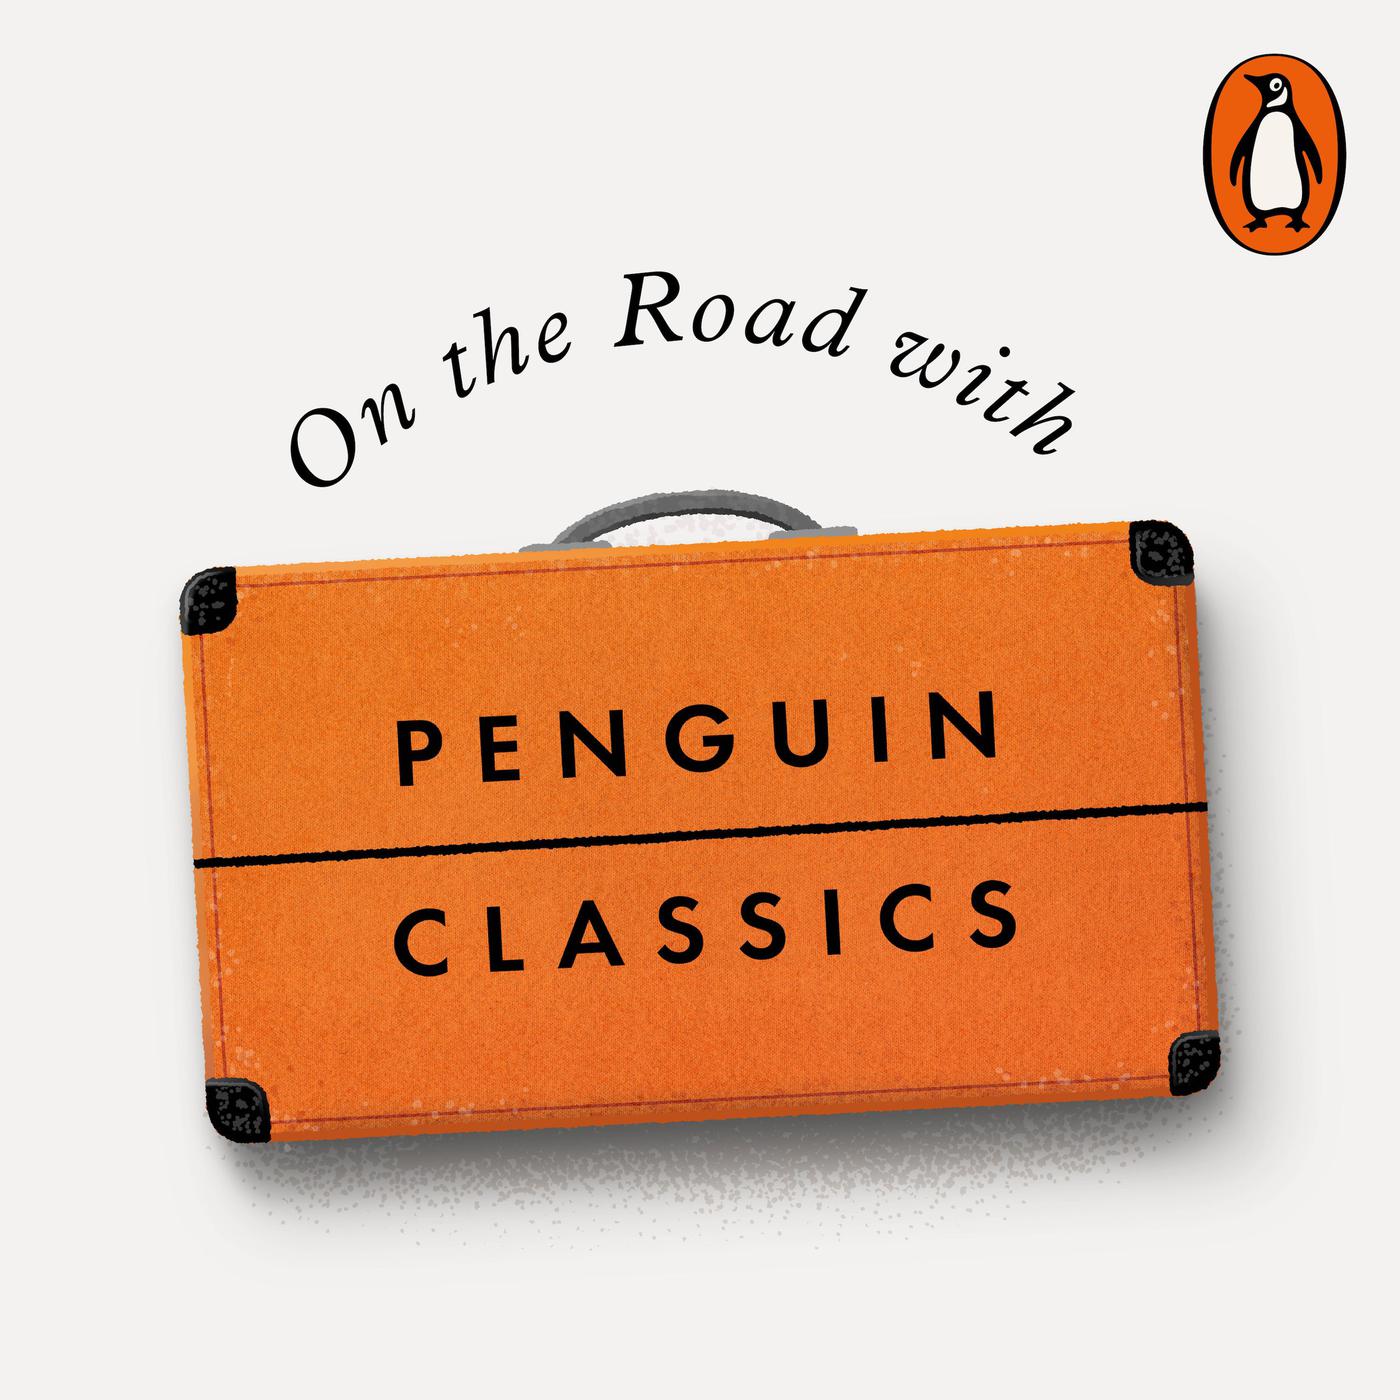 On the Road with Penguin Classics podcast logo